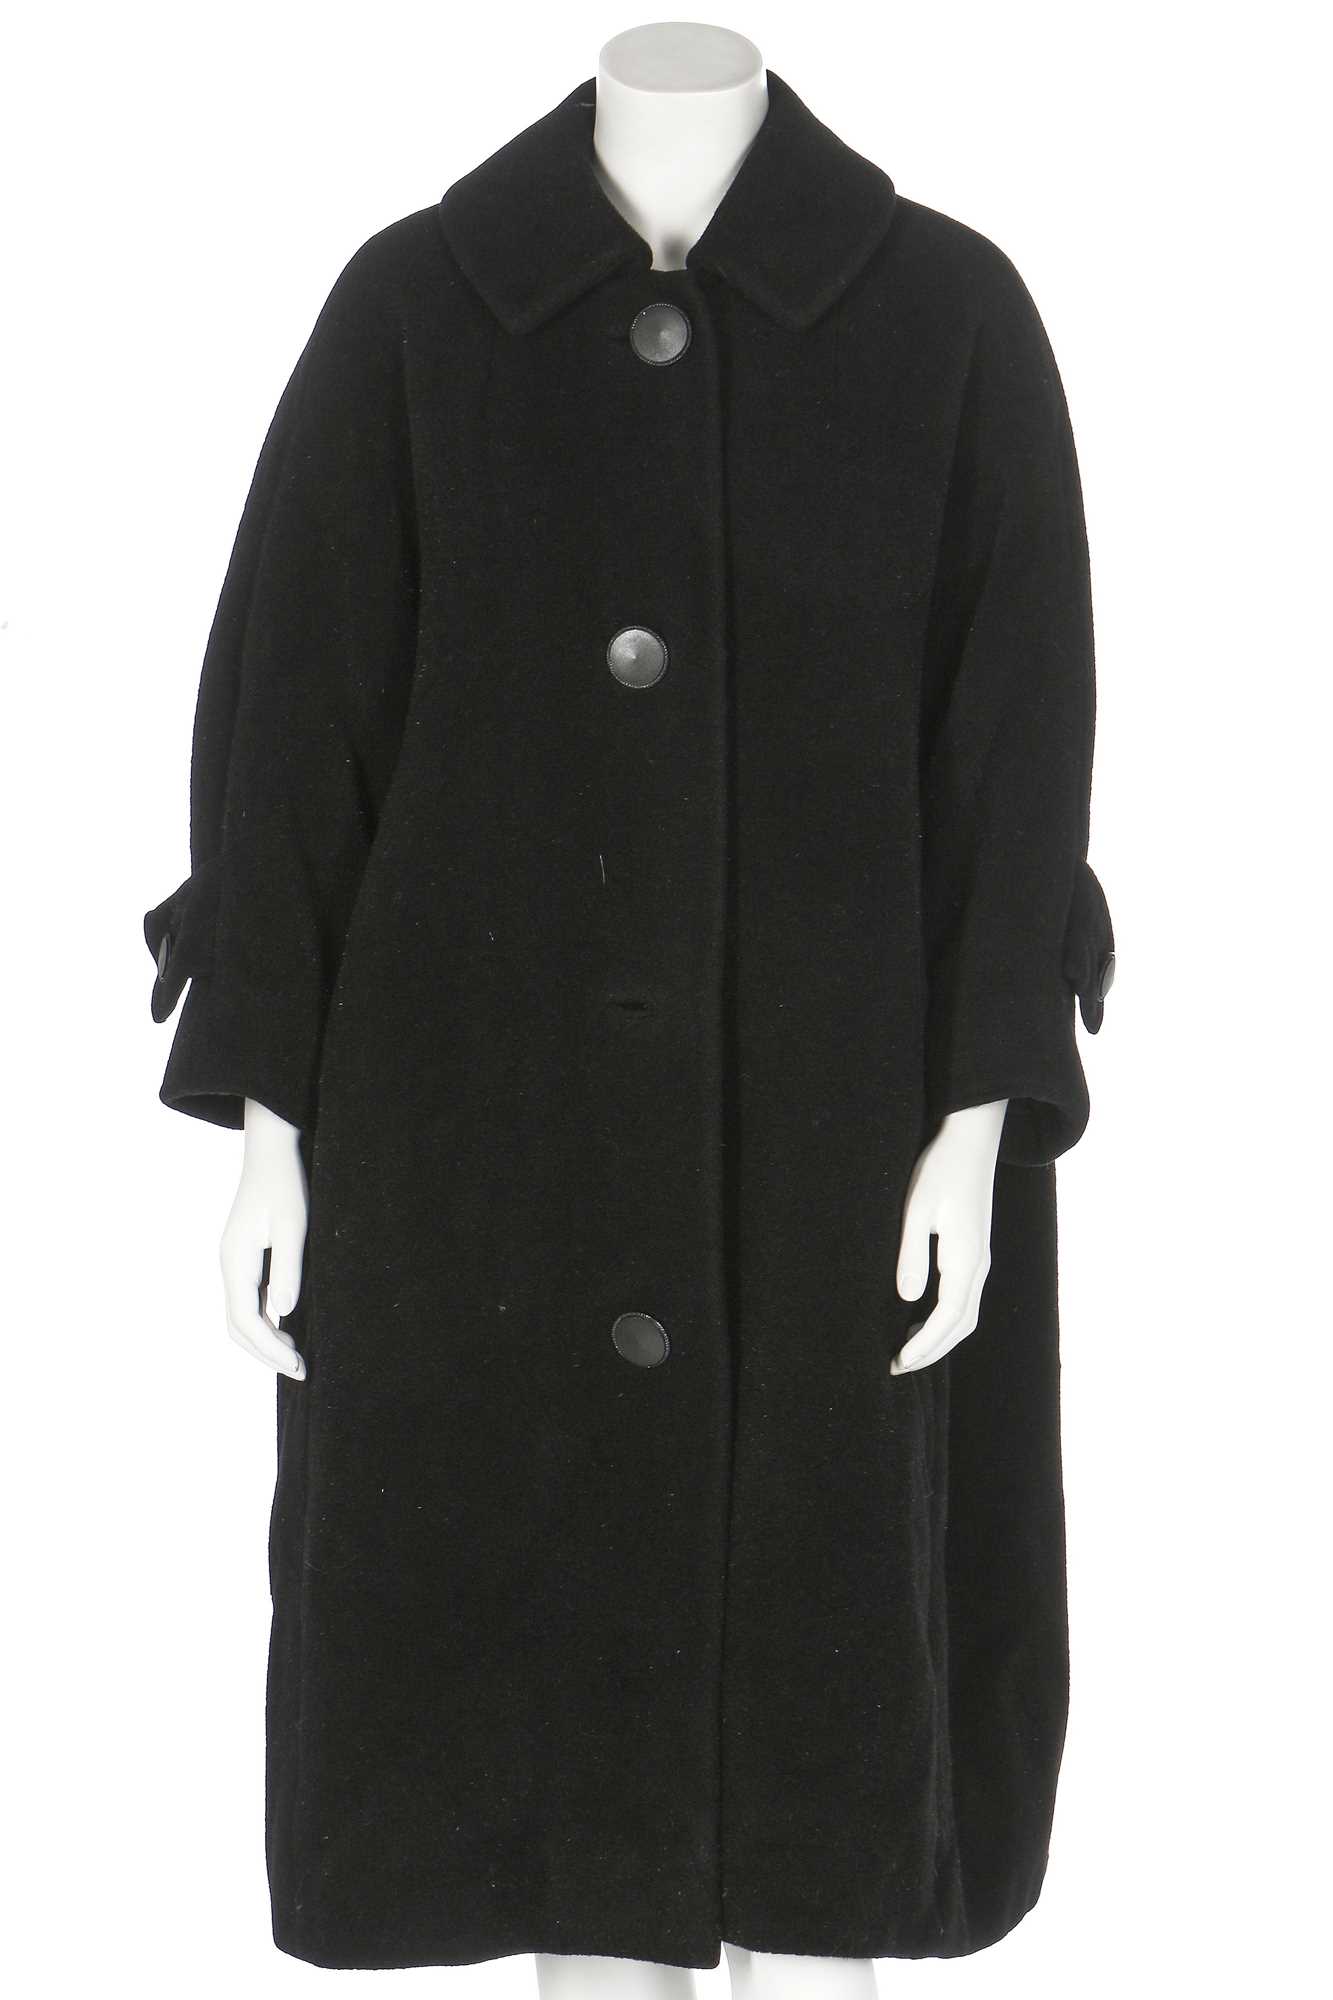 Lot 83 - A Christian Dior by Yves Saint Laurent couture black wool tent coat, 1958-60